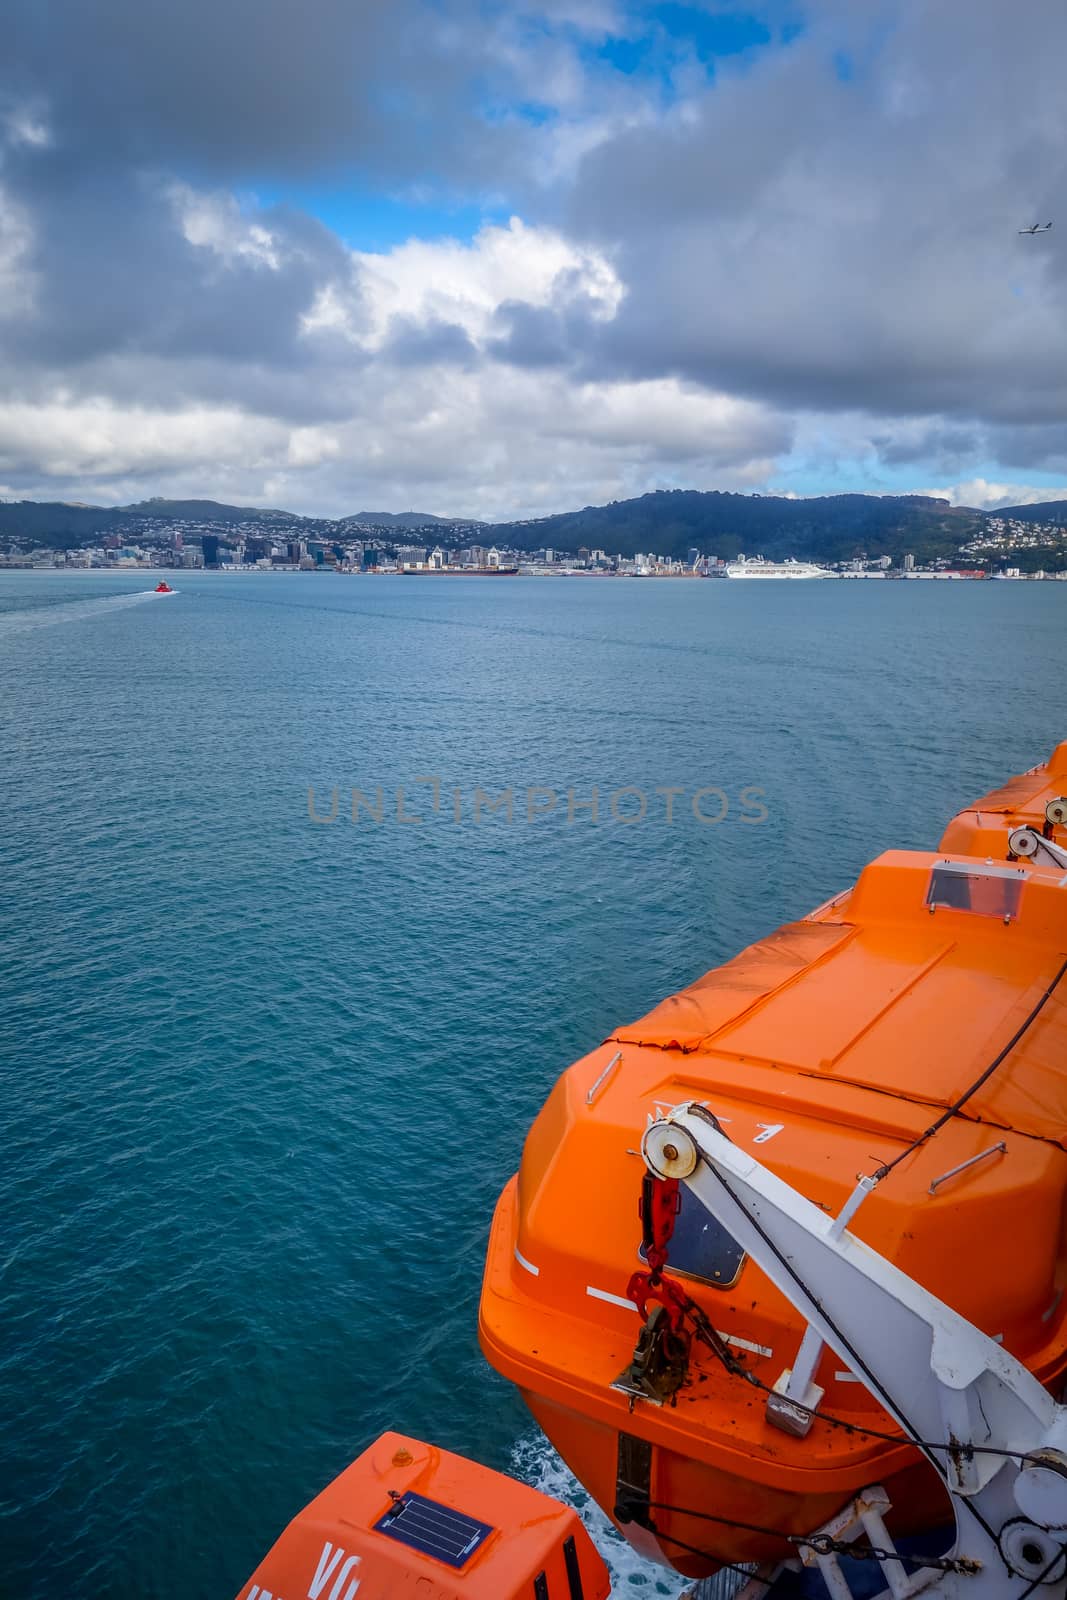 Wellington city view from a ferry, New Zealand by daboost